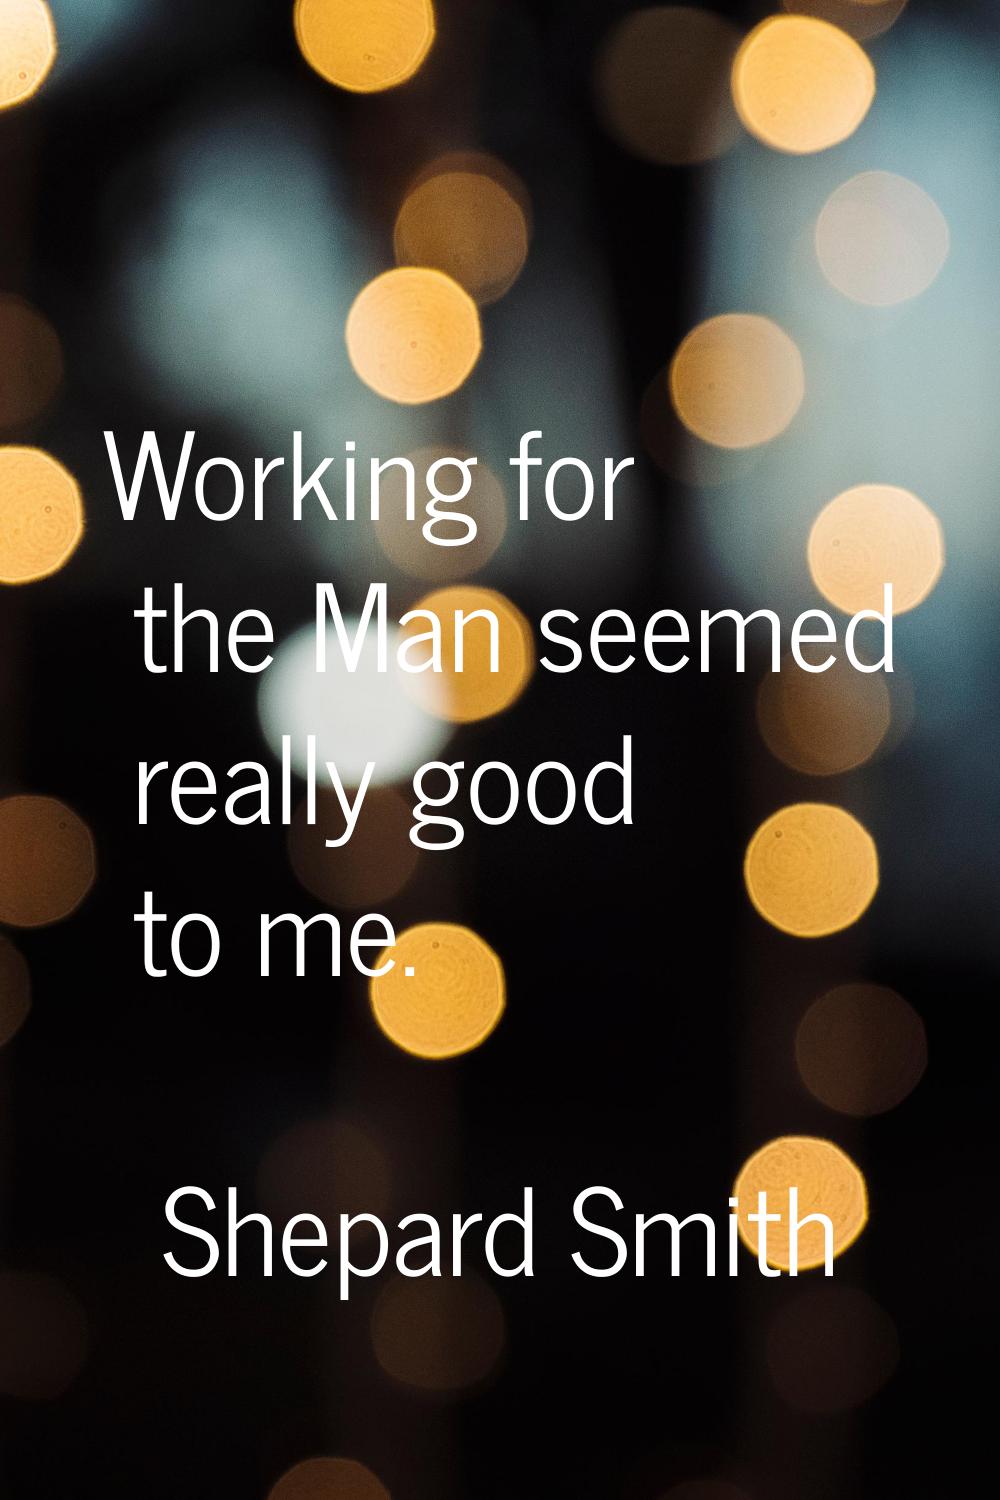 Working for the Man seemed really good to me.